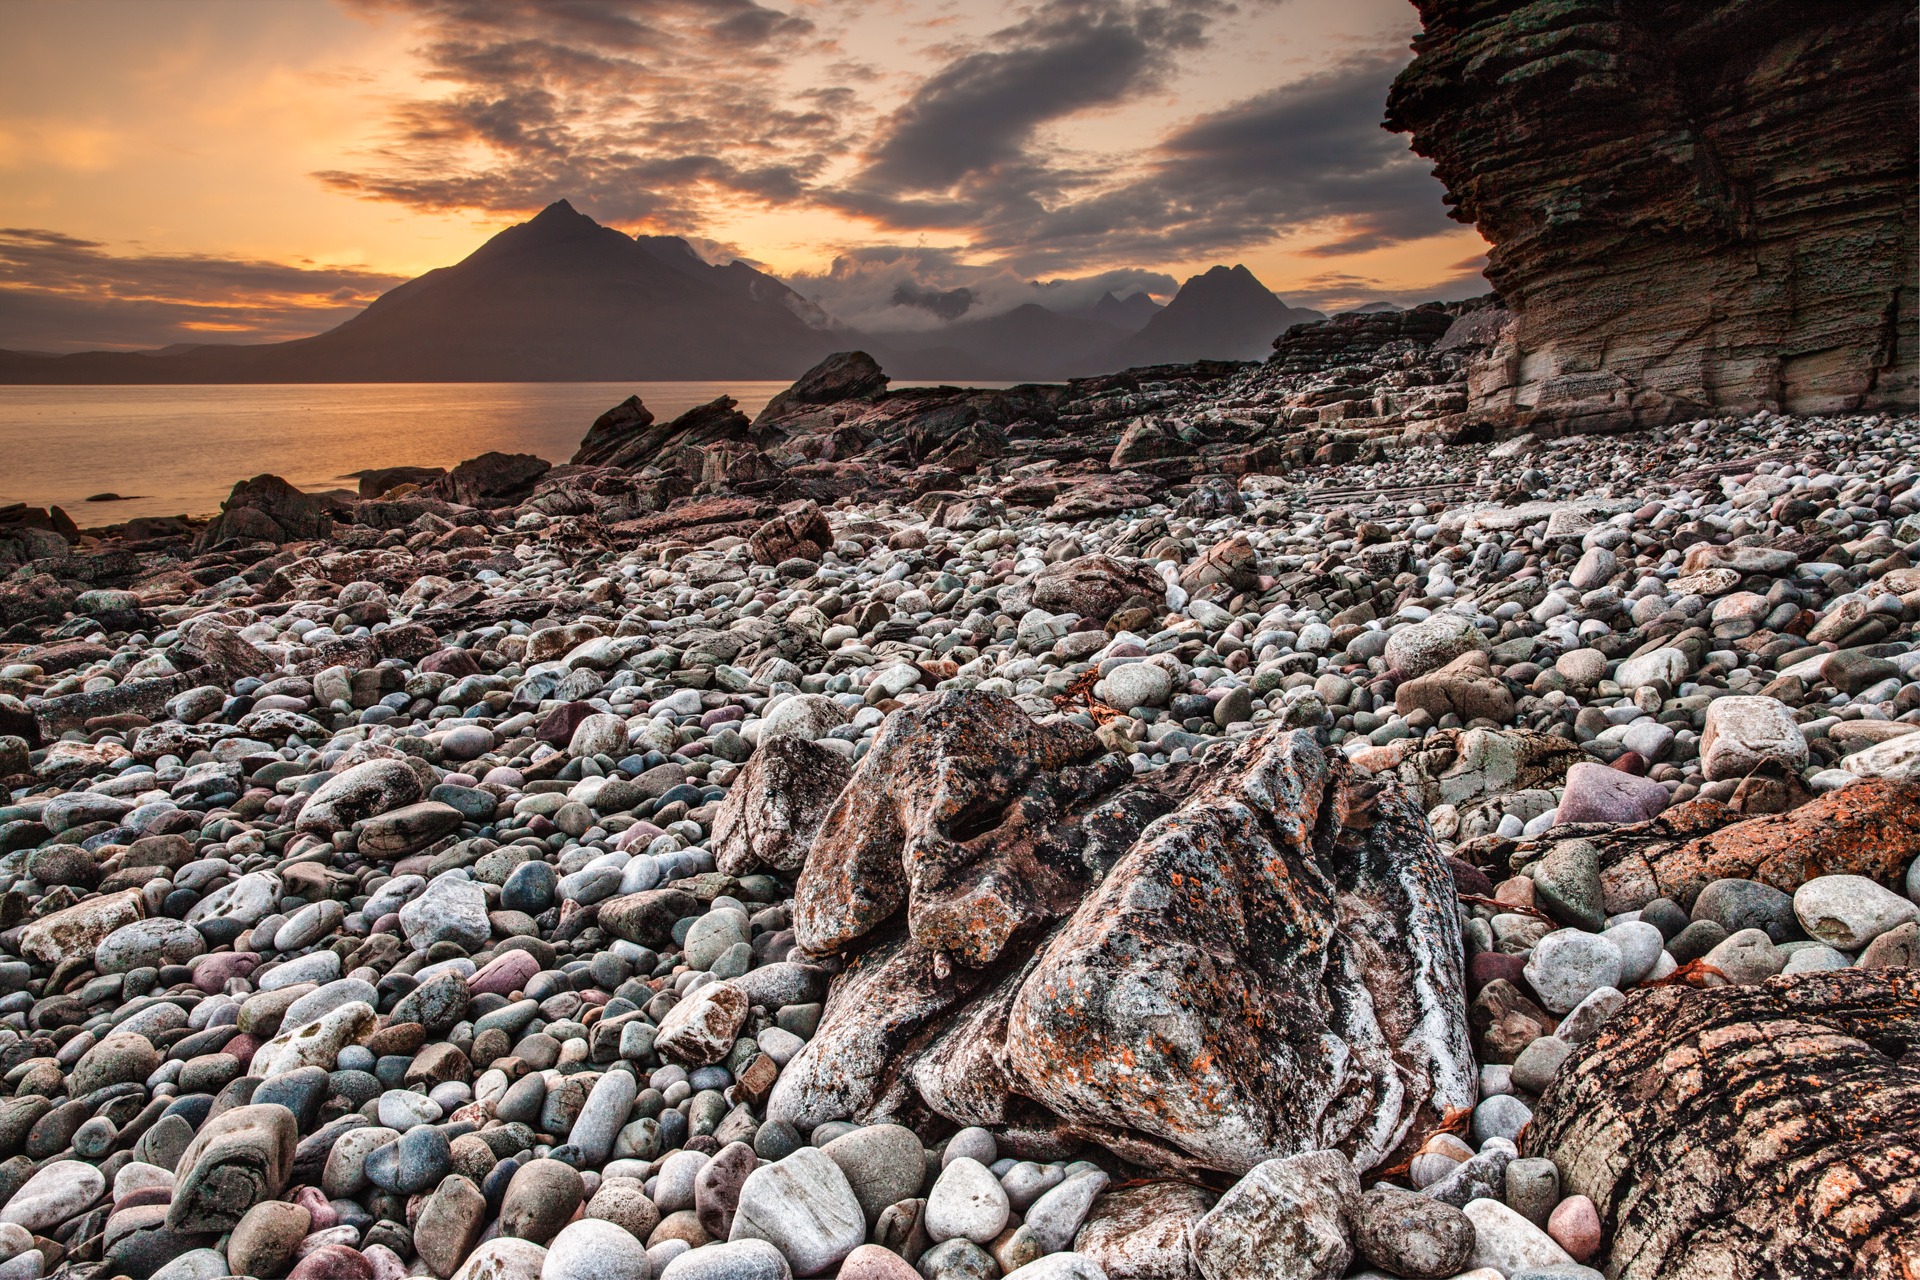 A rocky seashore with a mountain in the distance